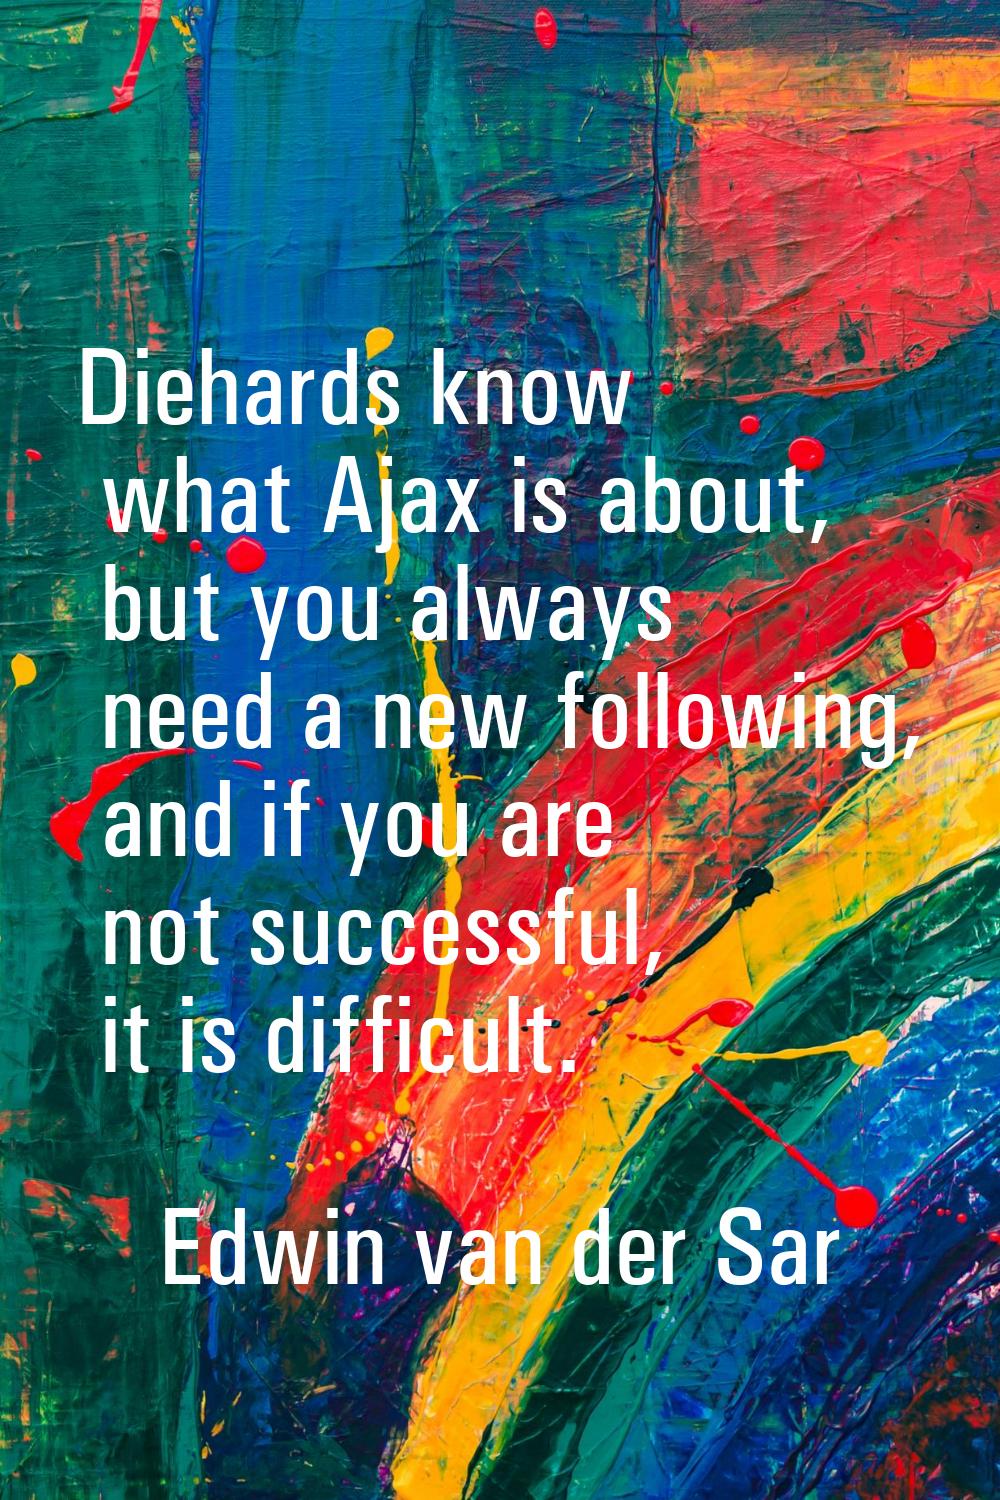 Diehards know what Ajax is about, but you always need a new following, and if you are not successfu